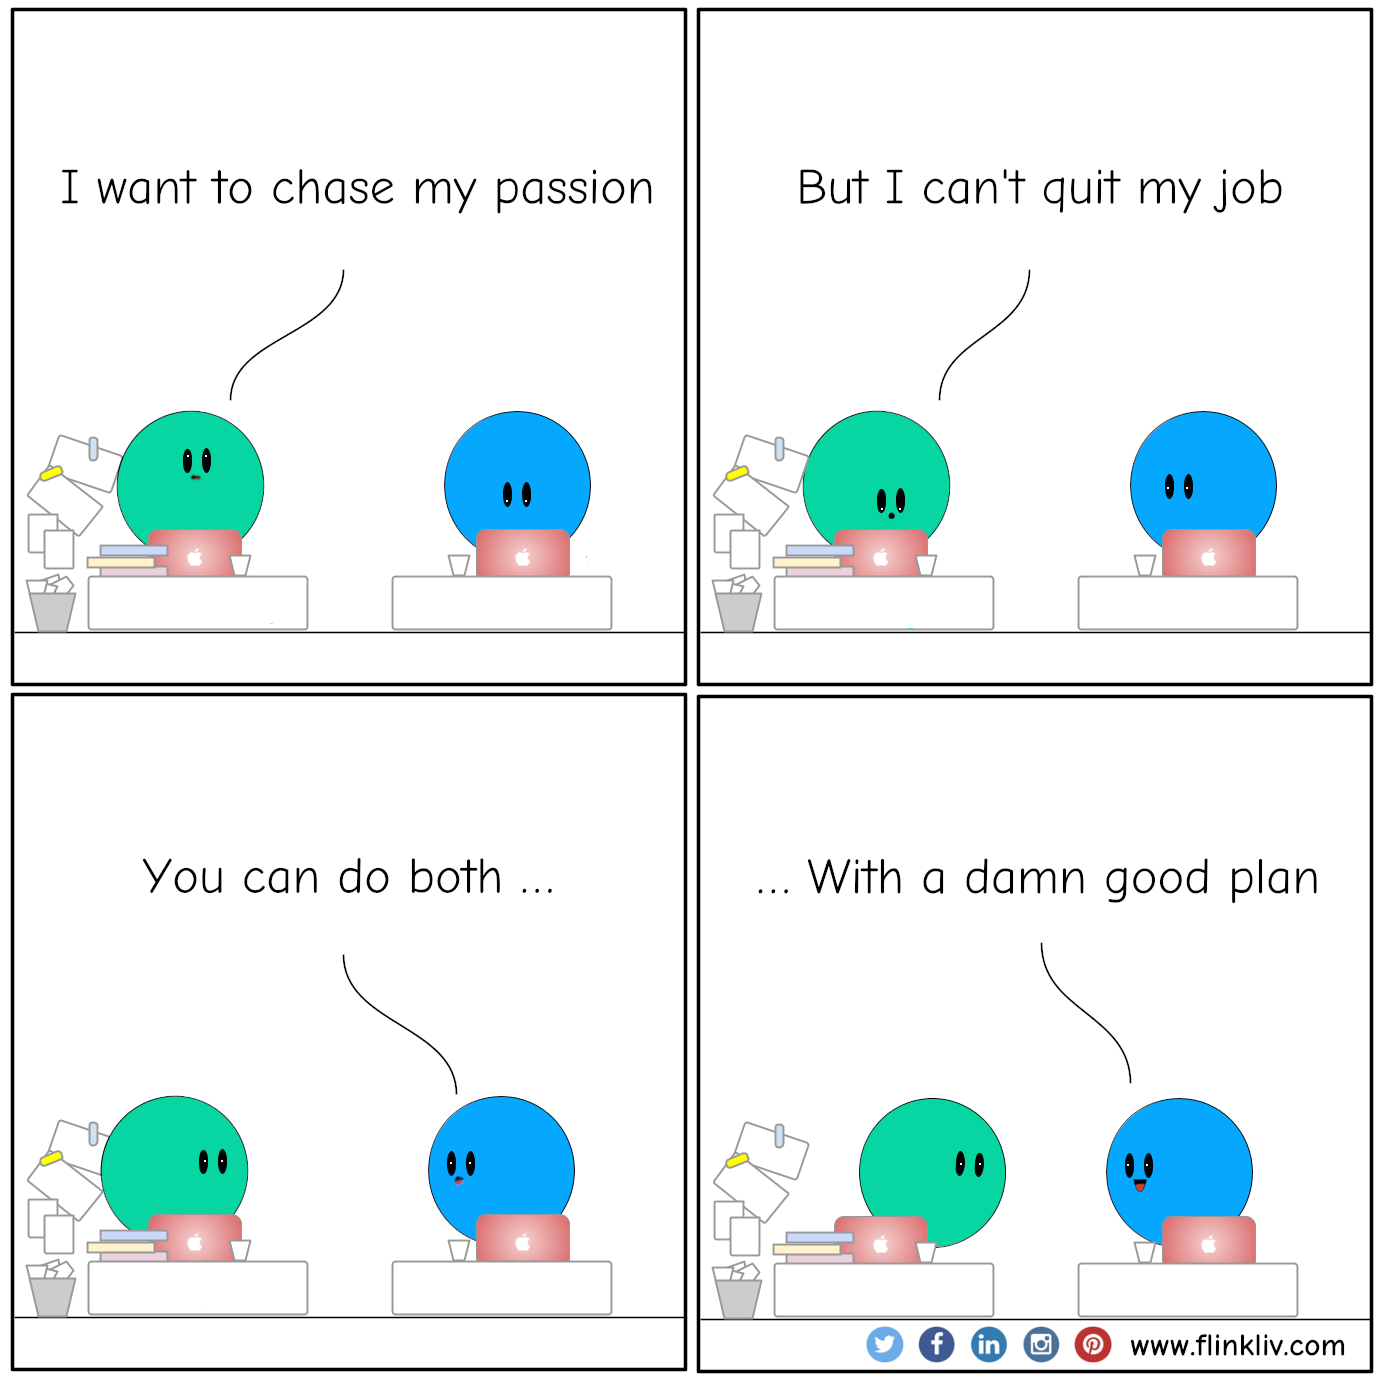 Conversation between A and B to know how to chase a dream and keep the day job.
				A: I want to chase my passion.
				B: But I can't quit my job.
				B: You can do both with a damn good plan.
				